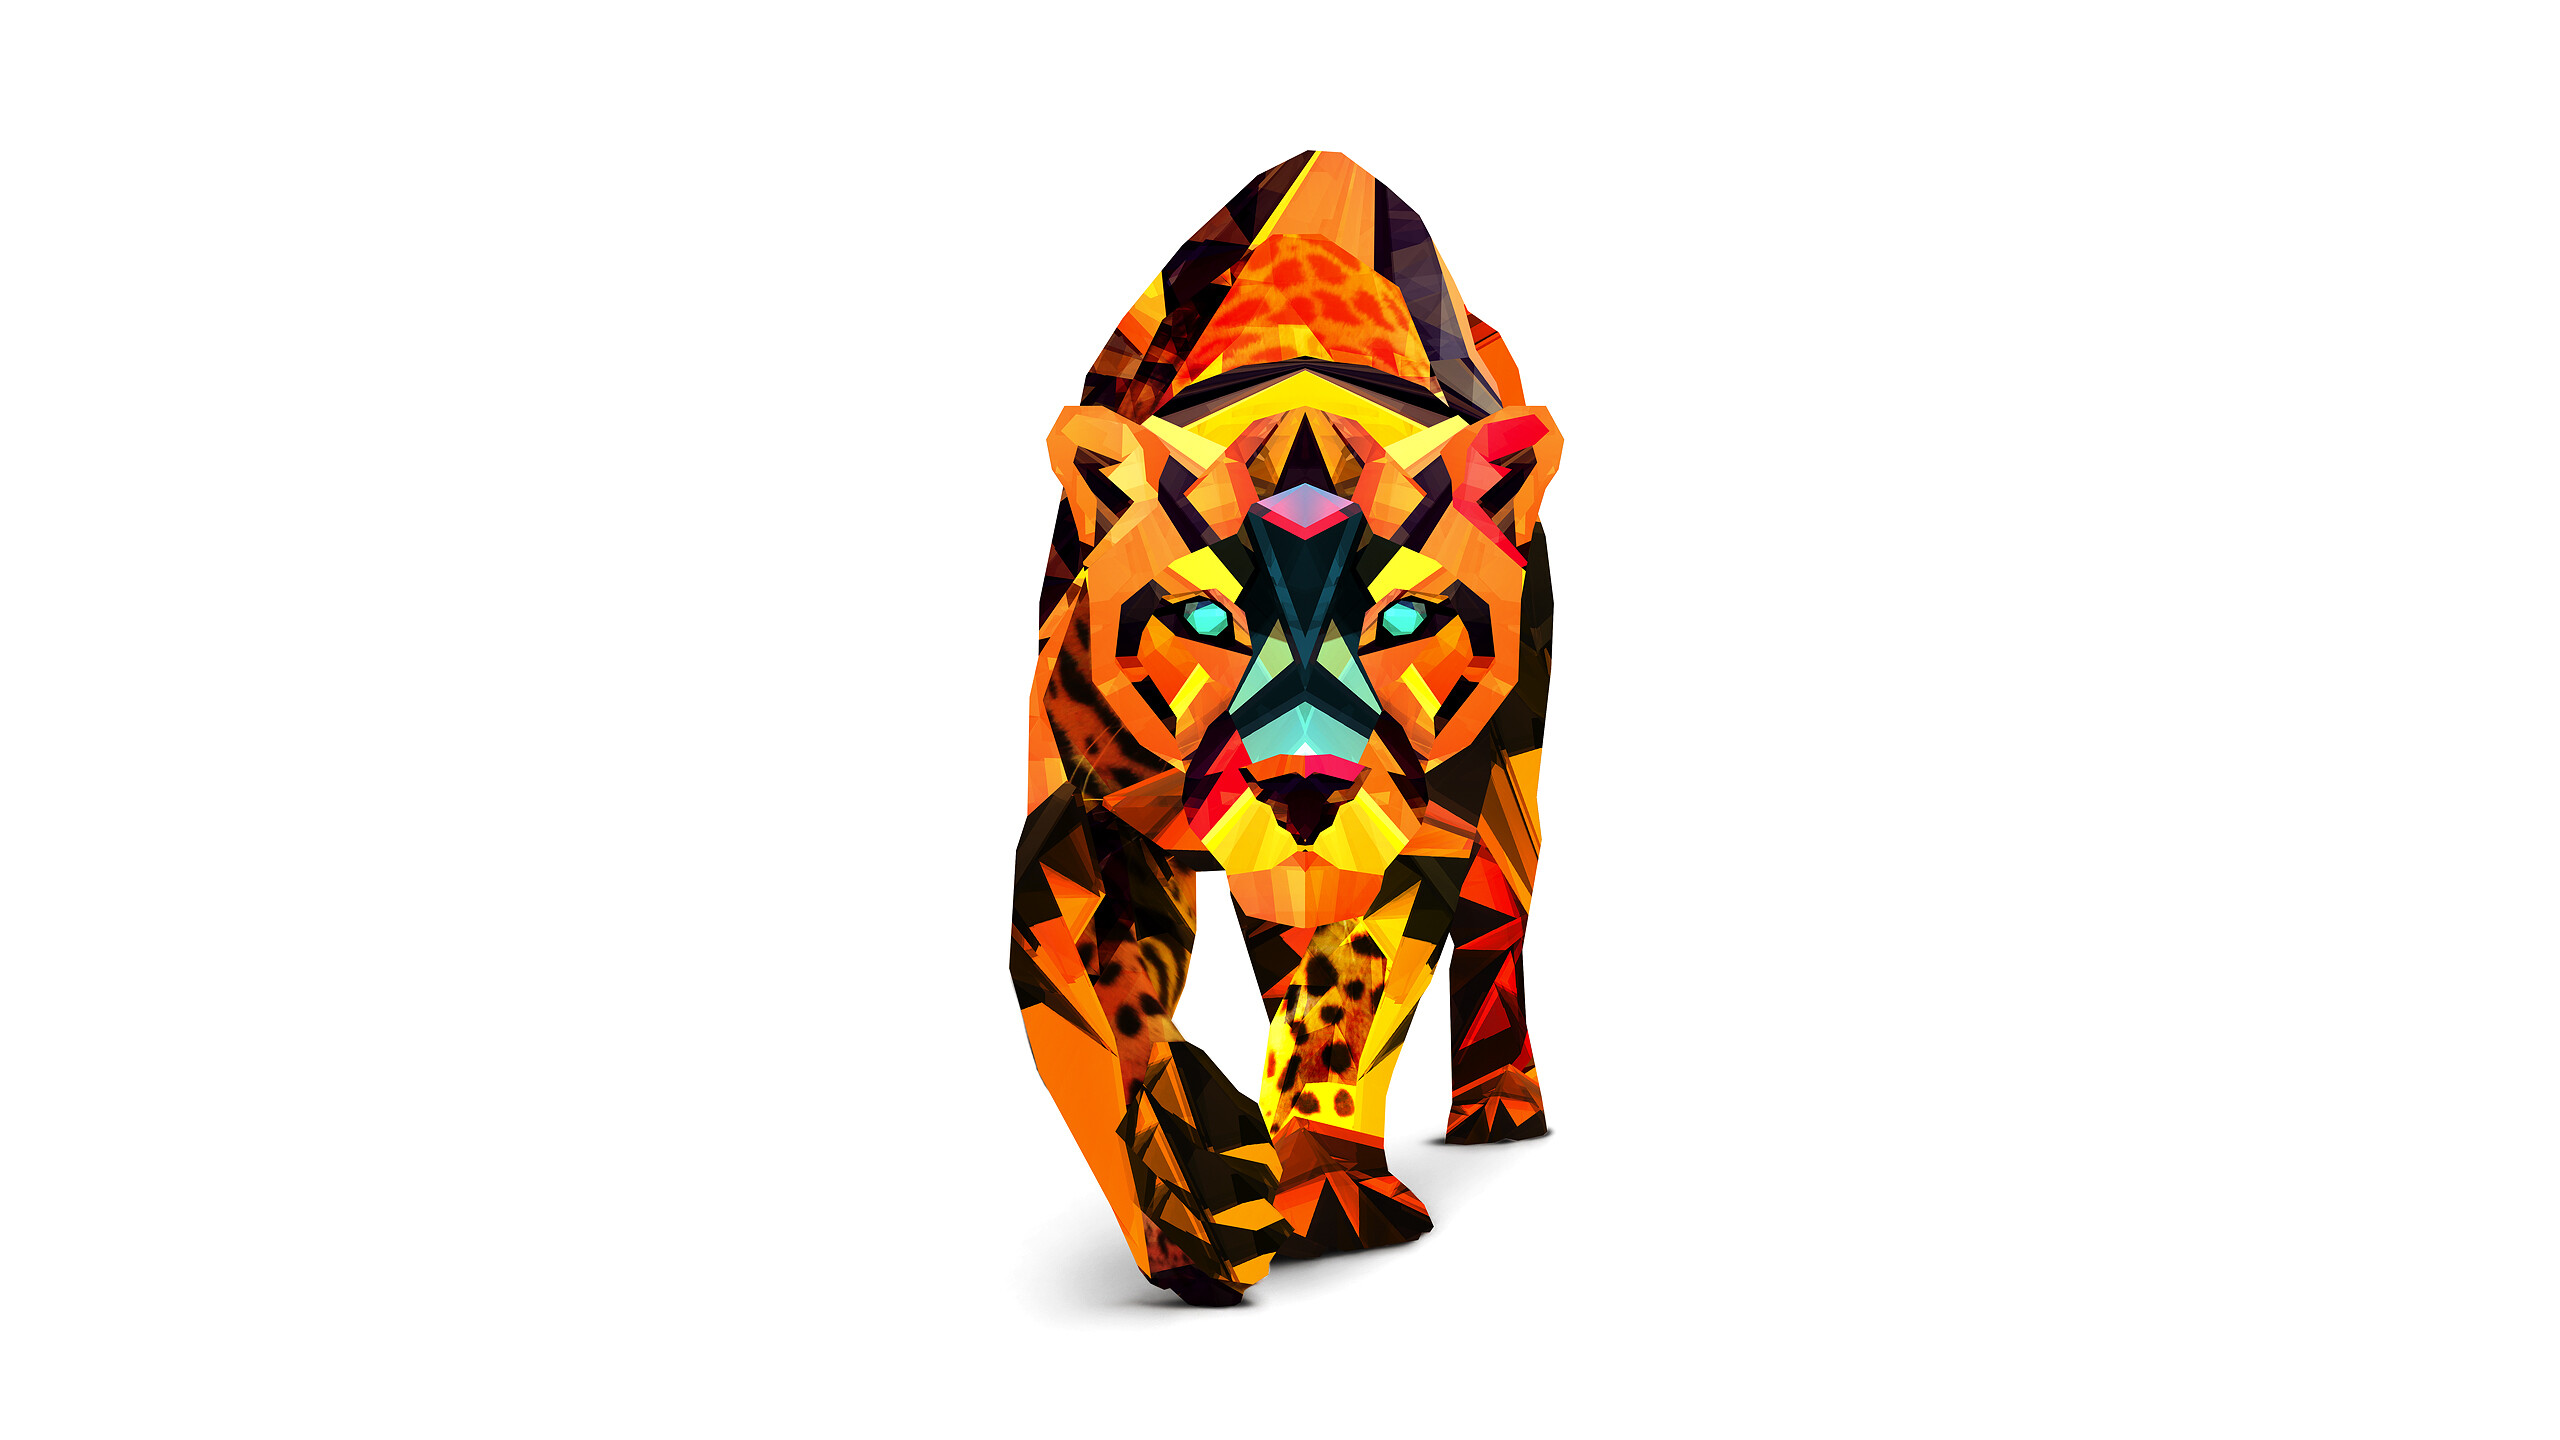 Geometric Animal: Art design that comes in various types, sizes, and shapes, Wild cat. 2560x1440 HD Background.